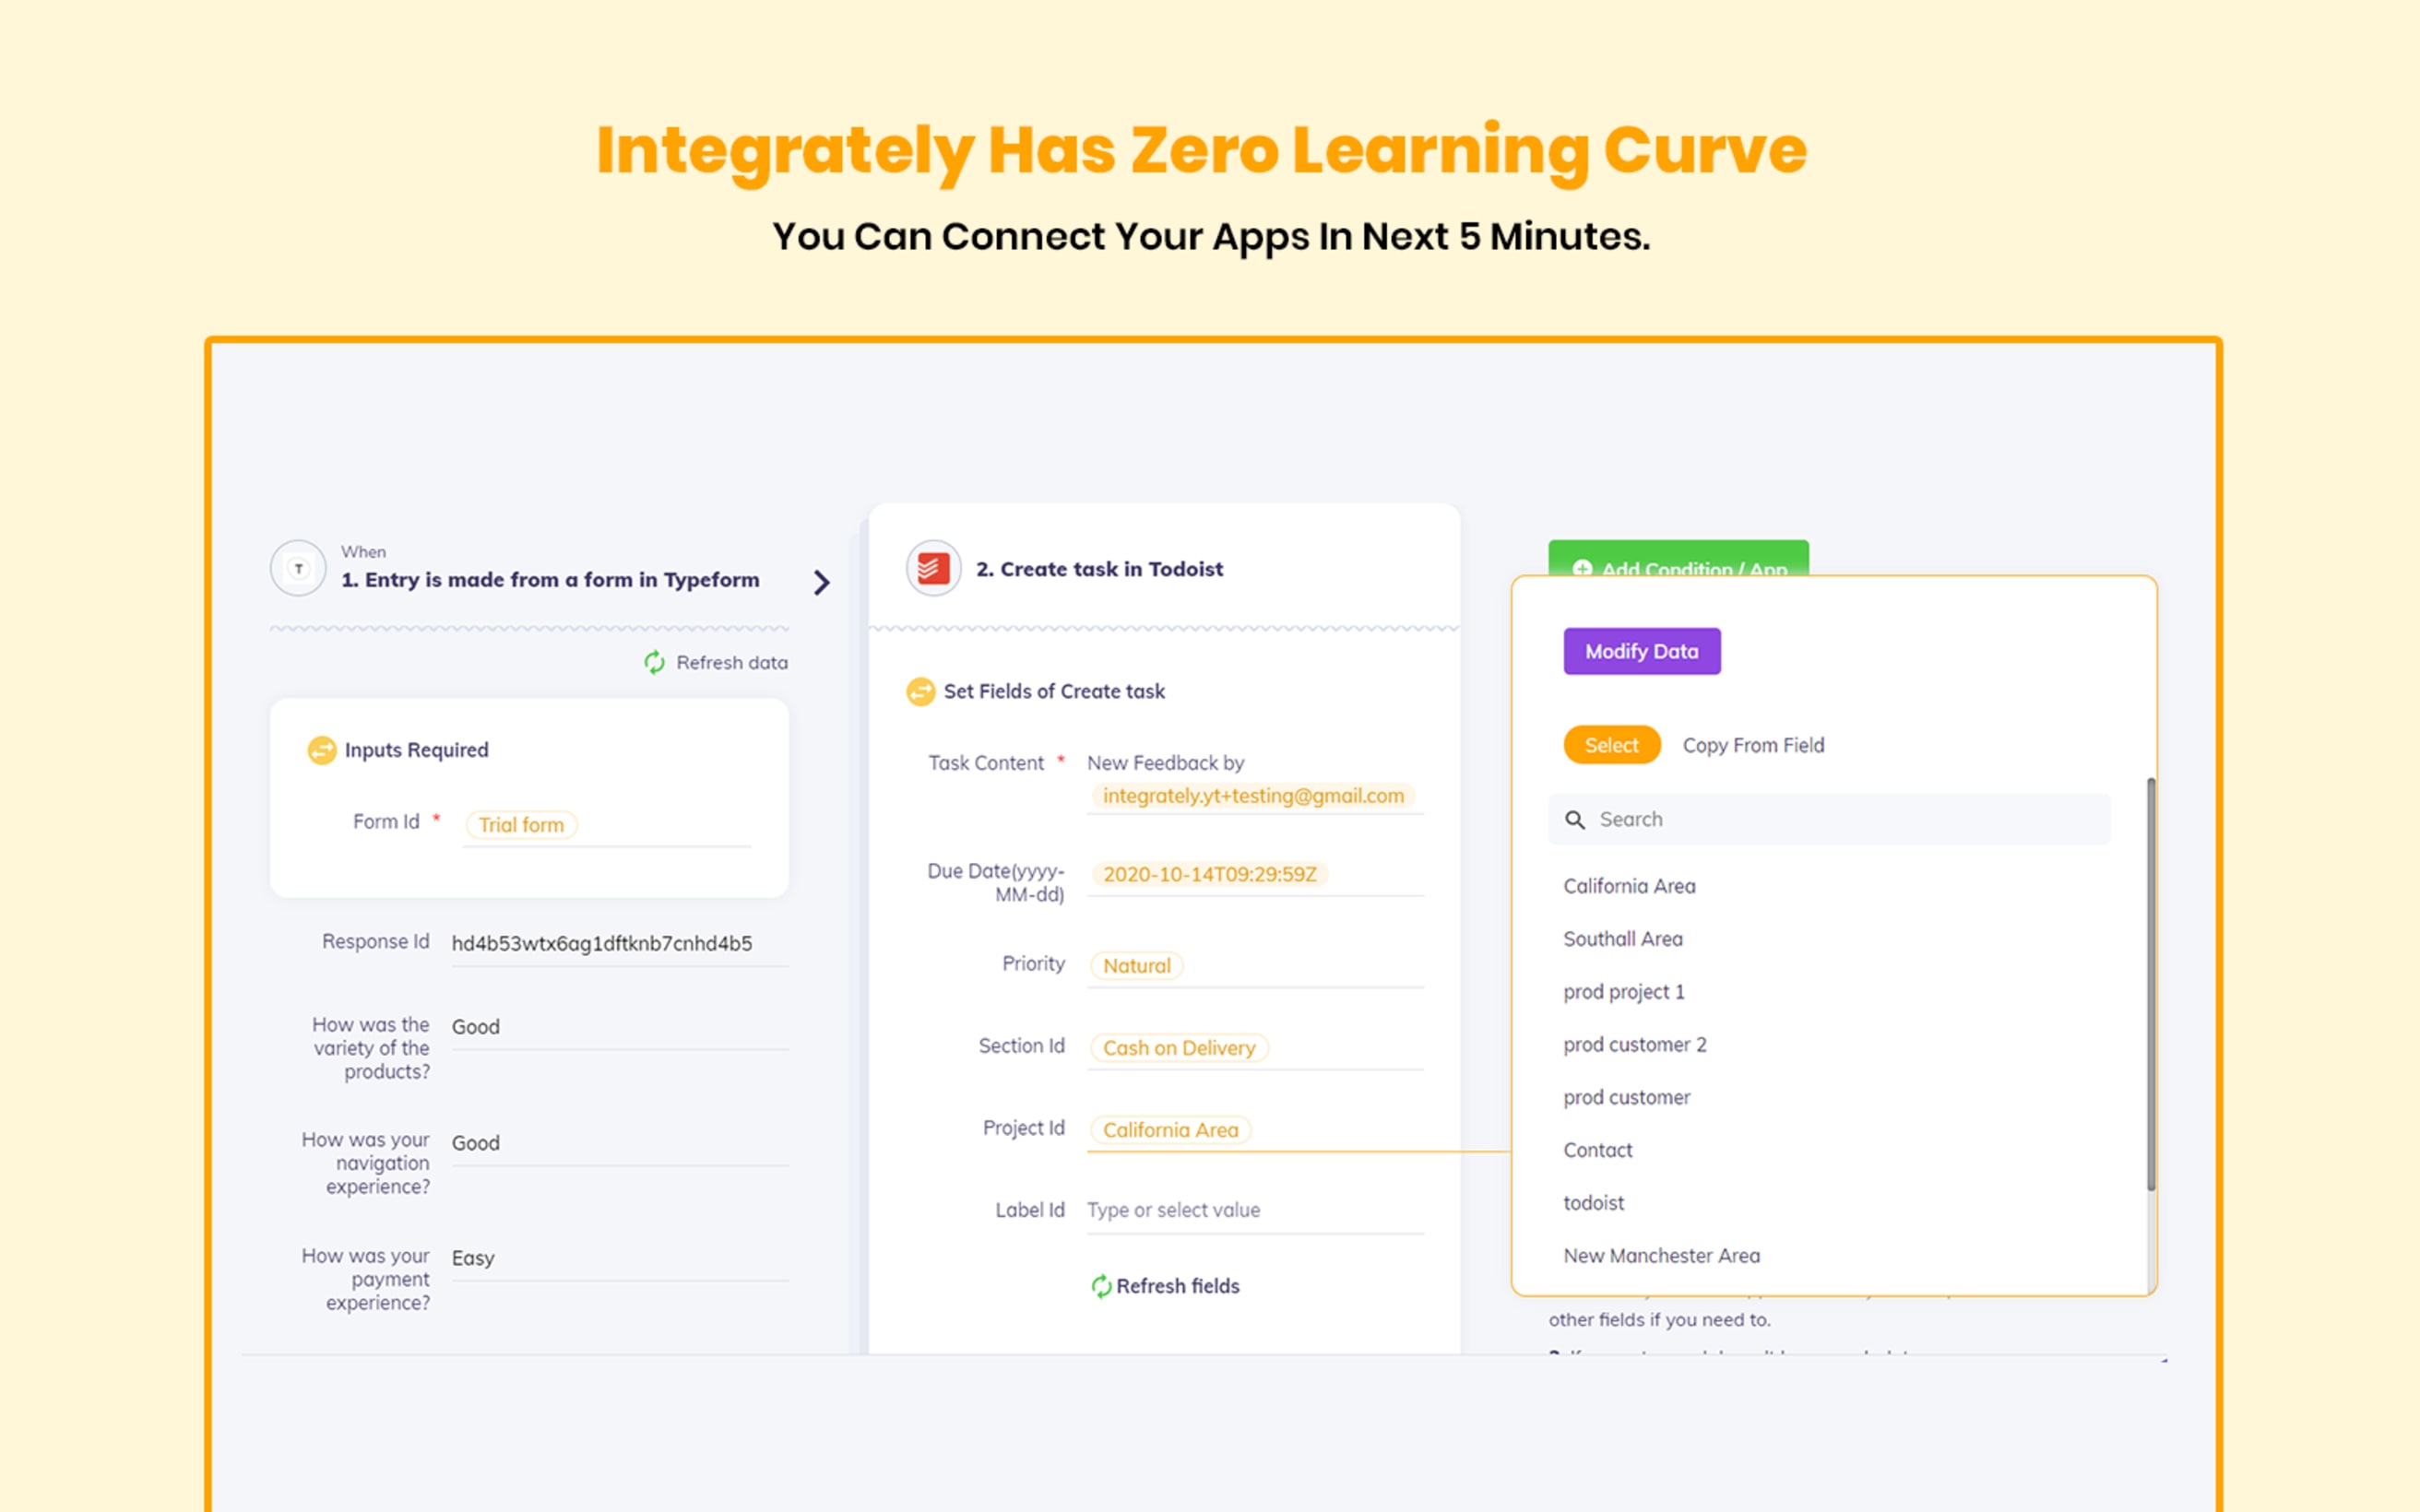 Integrately has zero learning curve